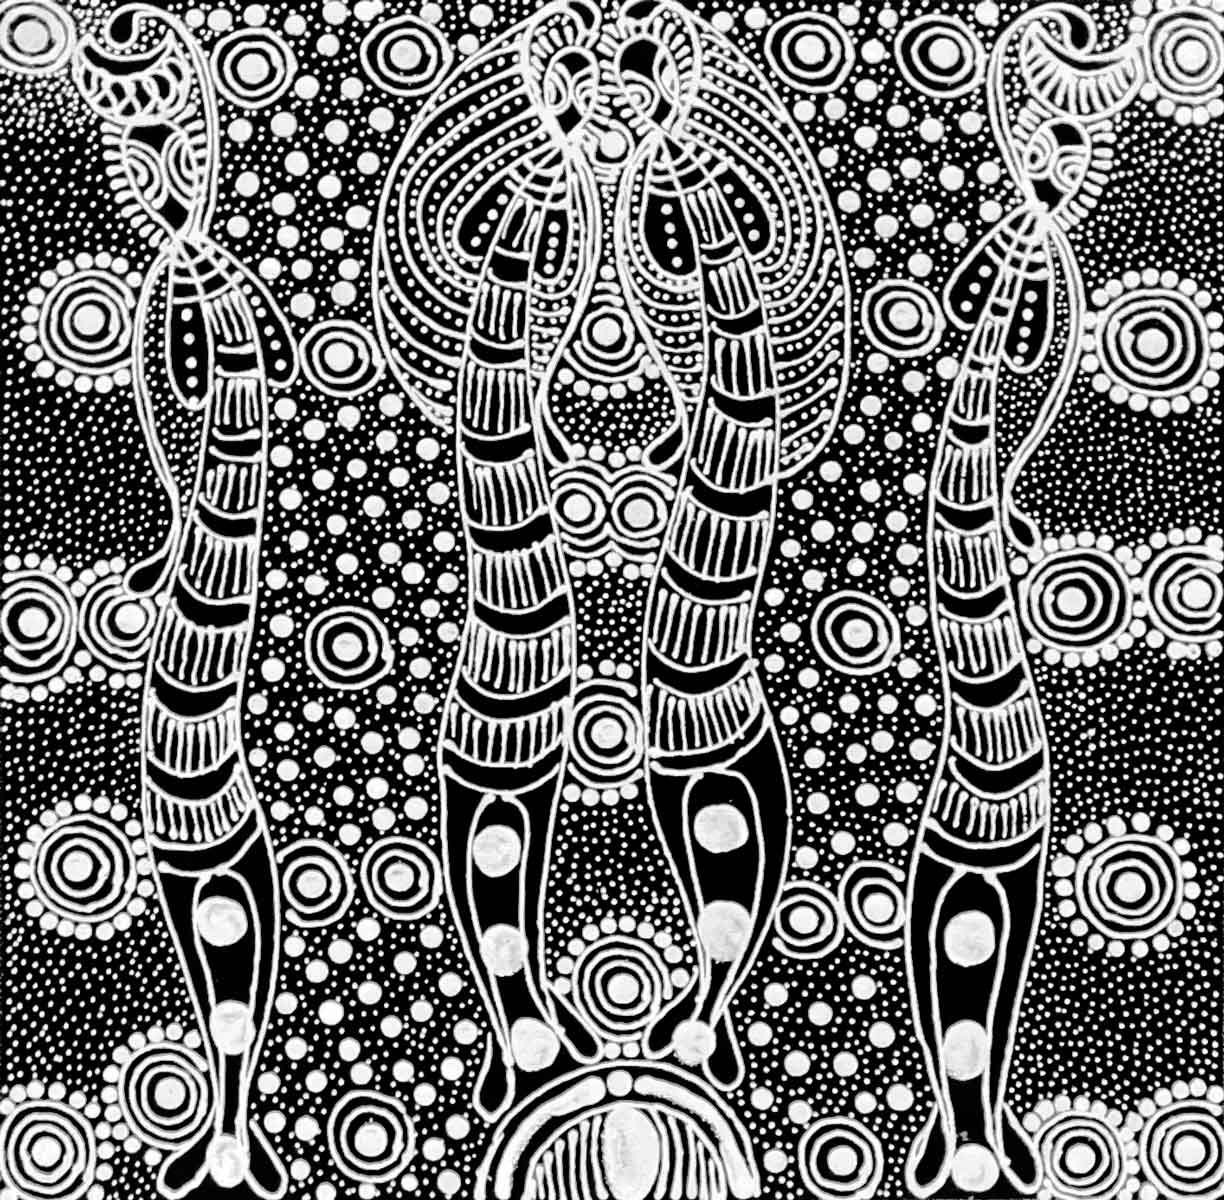 Dreamtime Sisters von Colleen Wallace Nungari